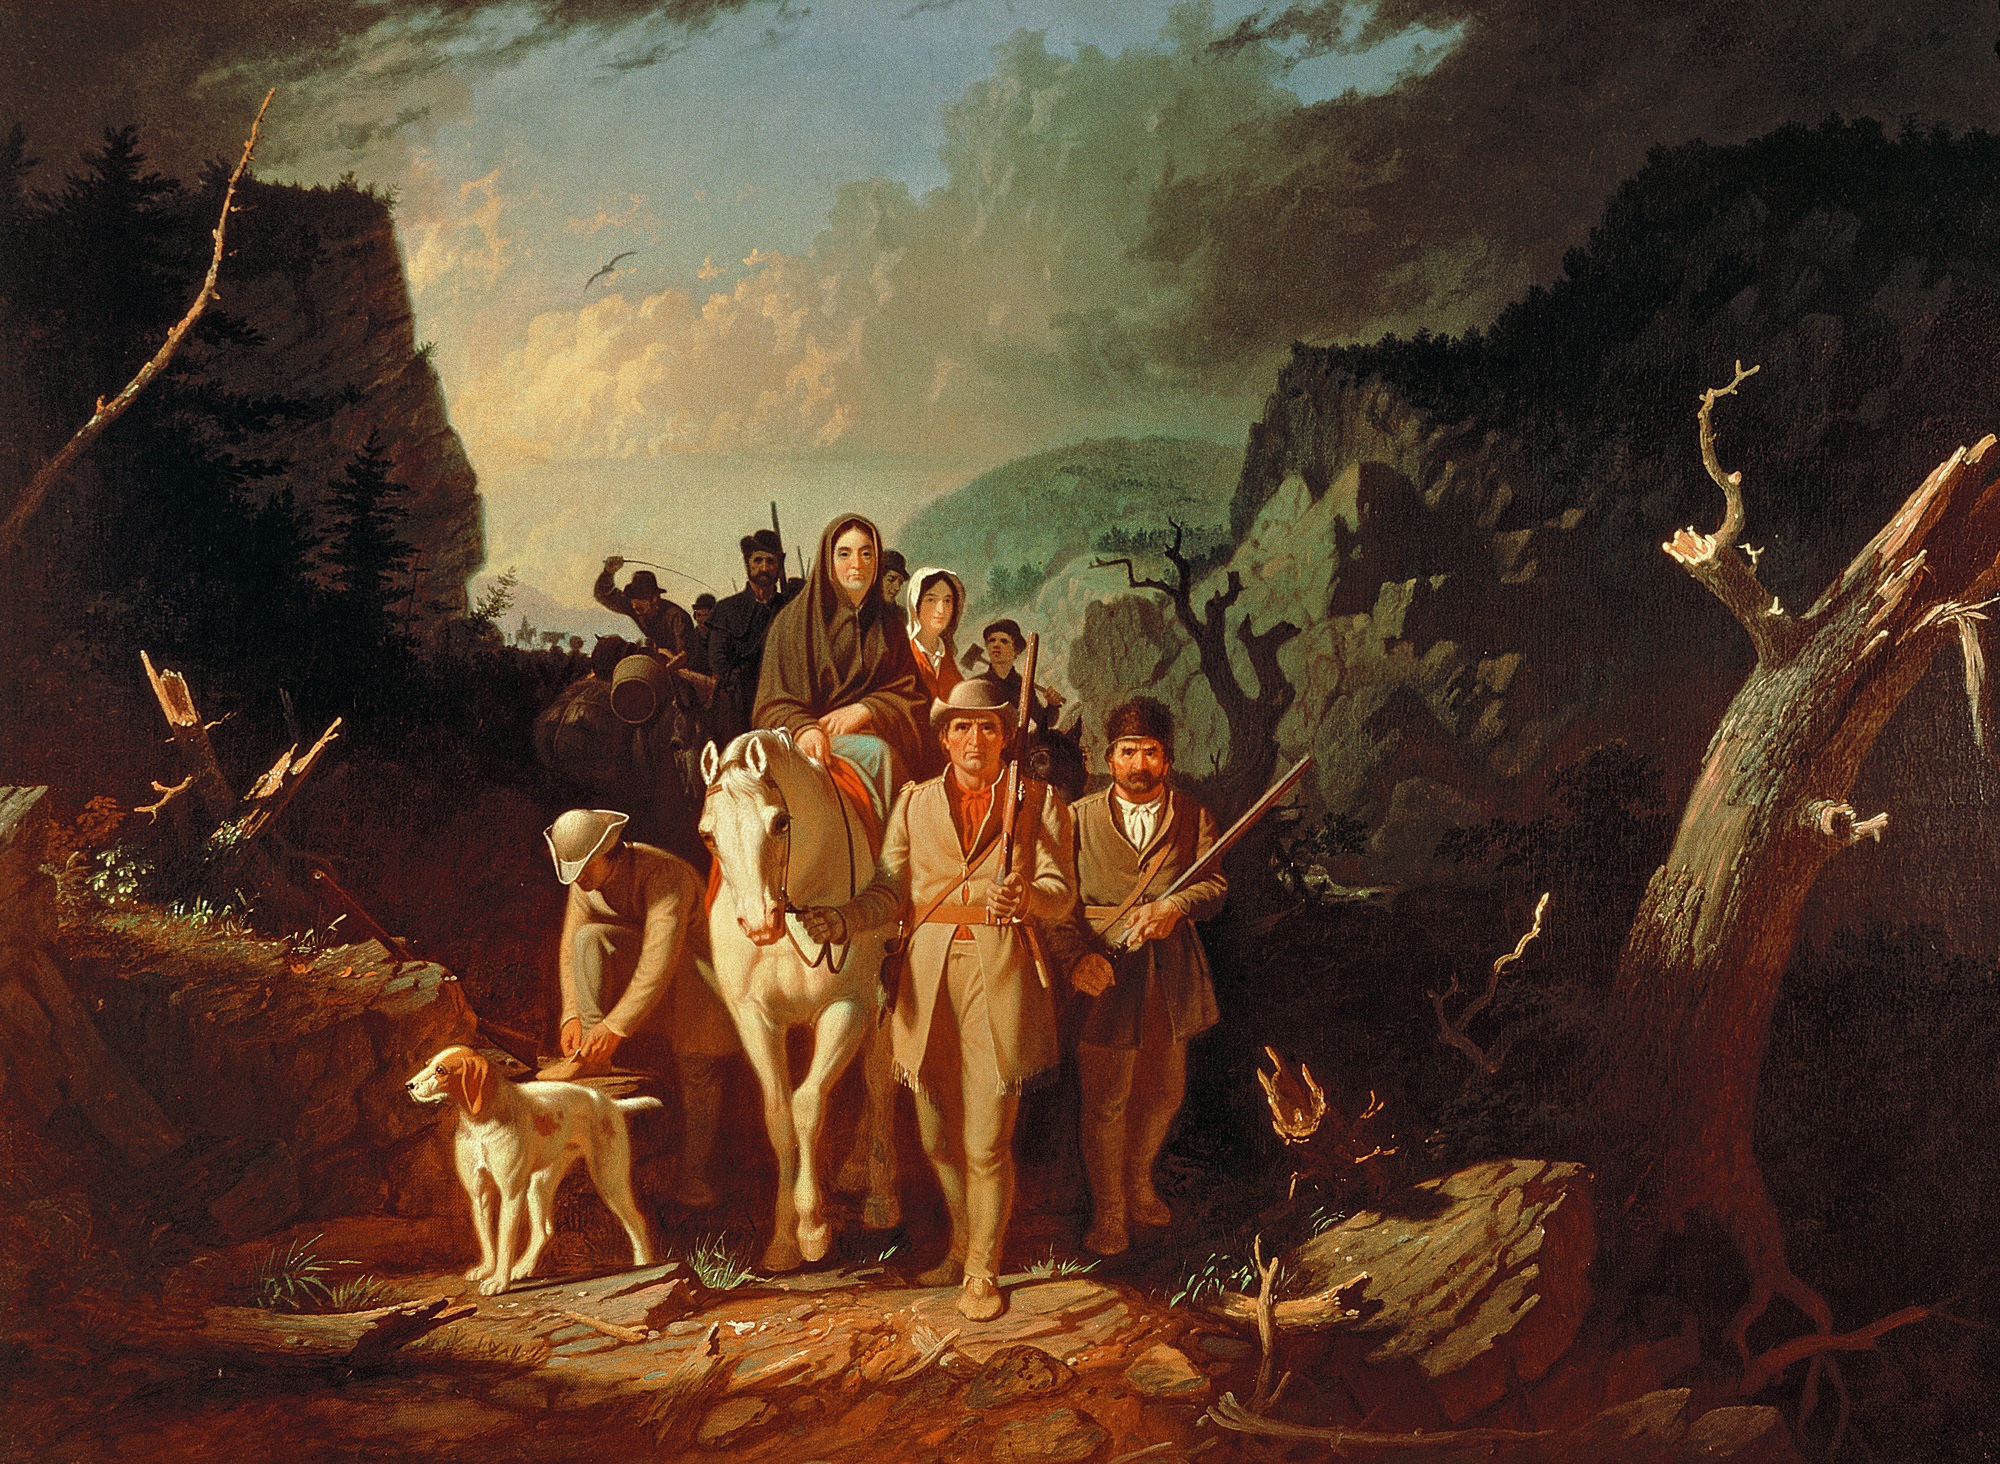 Daniel Boone Escorting Settlers through the Cumberland Gap by George Caleb Bingham, oil on canvas, 1851–52. Daniel (1734-1820) and his wife Rebecca travelling westwards to Kentucky. Currently at Mildred Lane Kemper Art Museum, Washington University, St. Louis, Missouri.